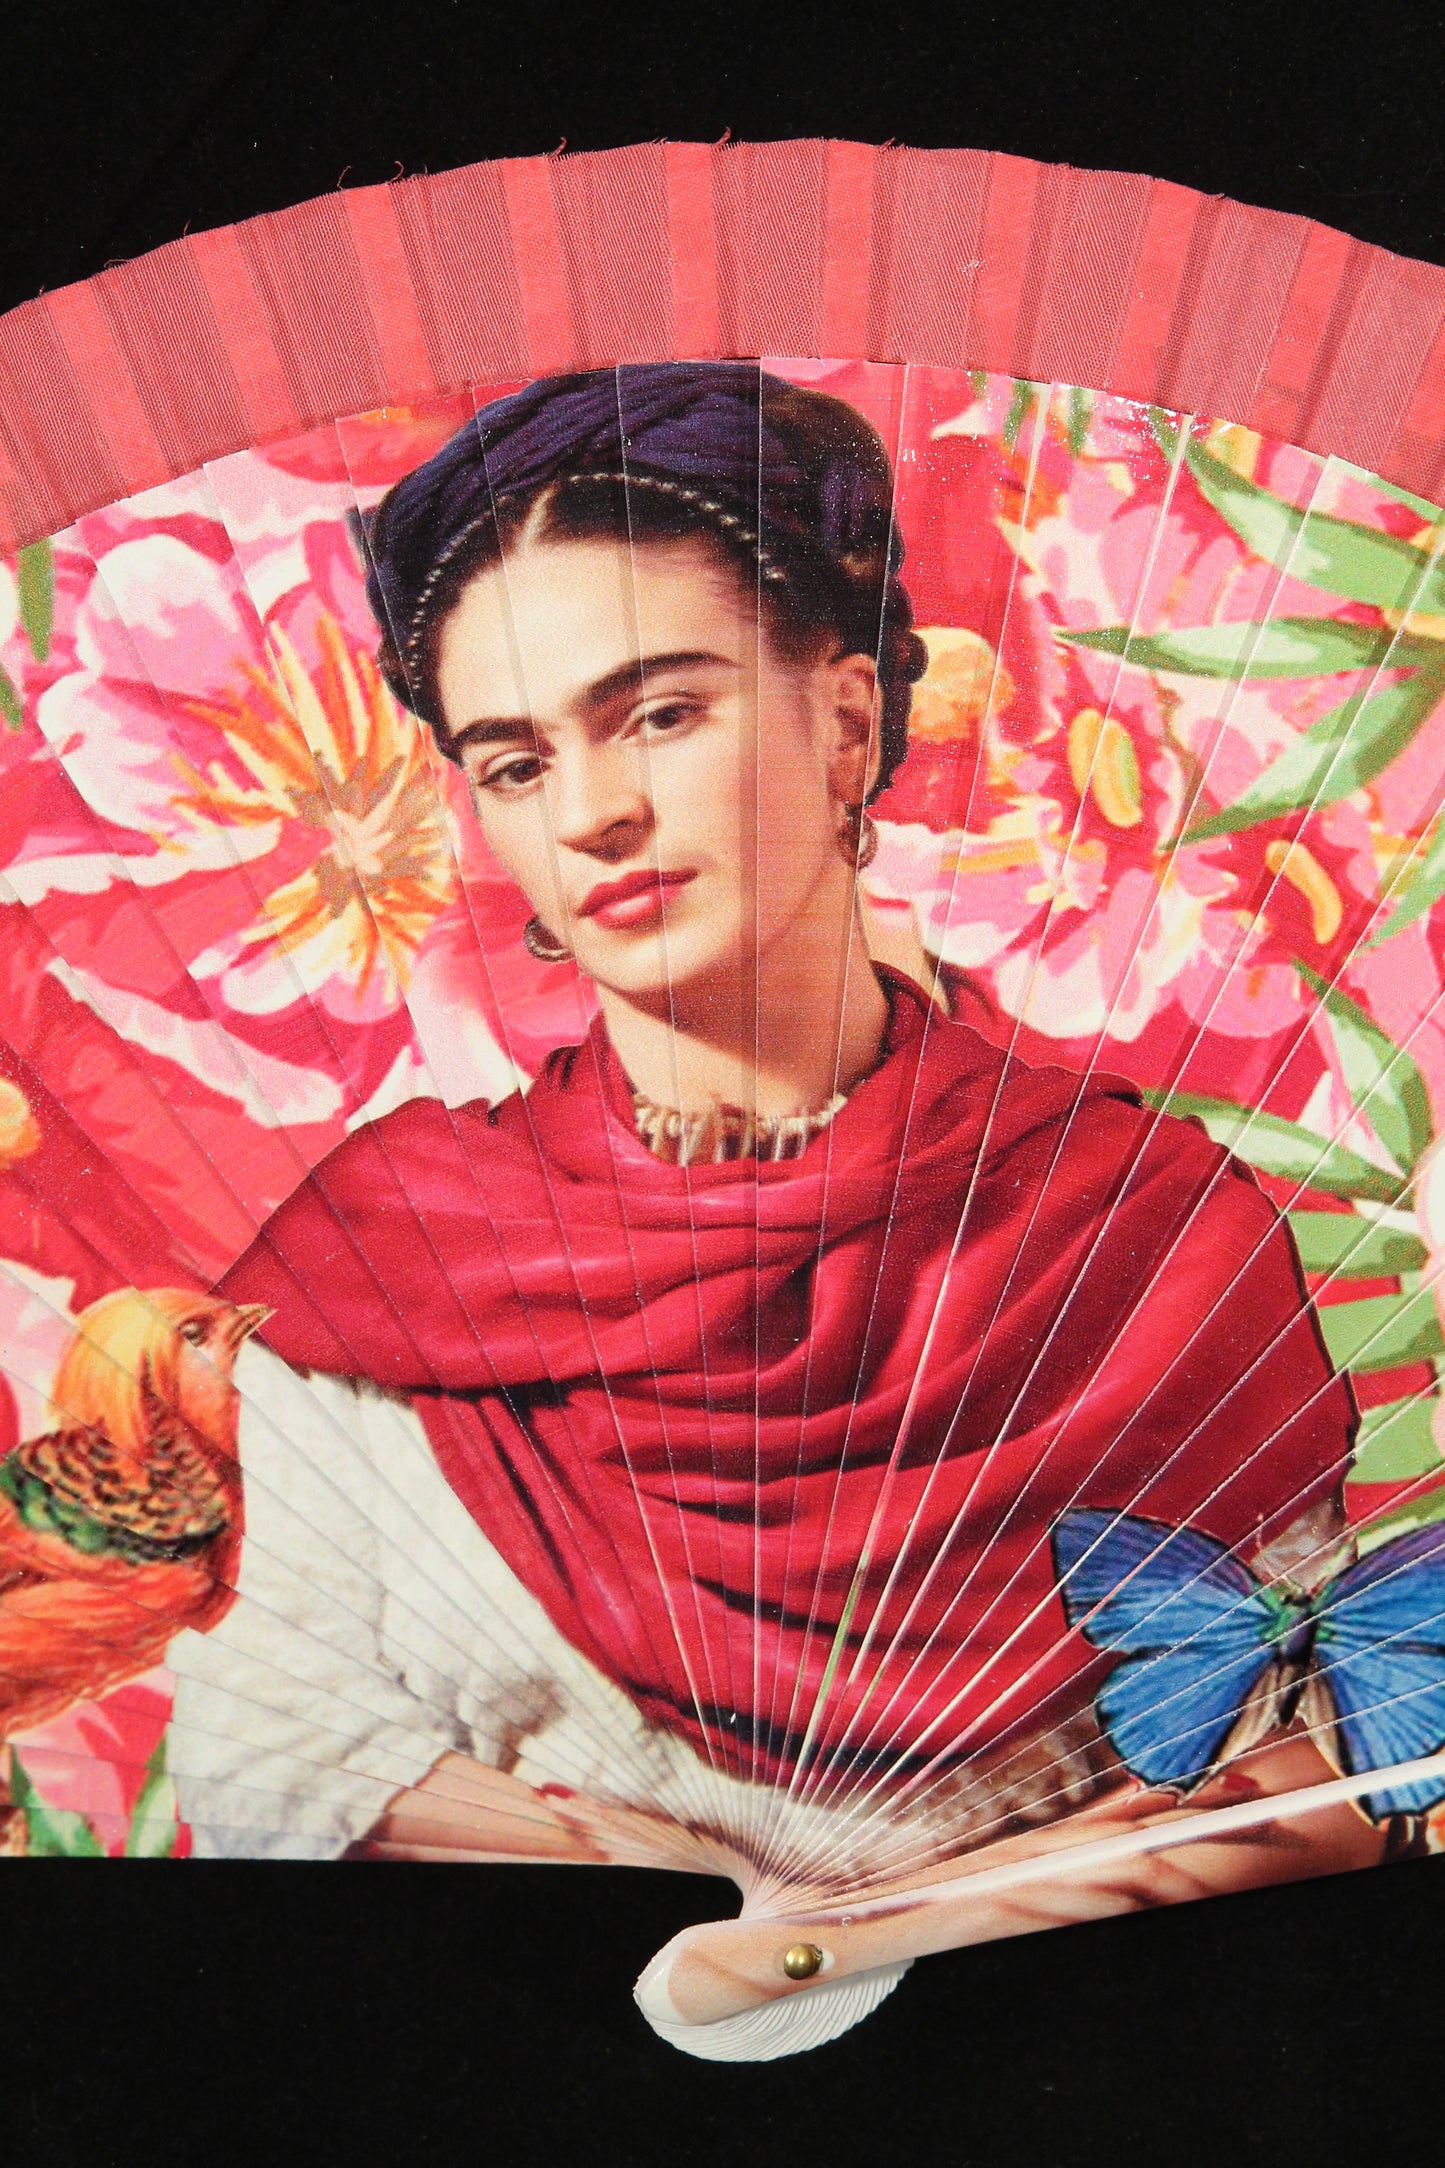 New "Frida" Hand Fan Direct from Spain Lacquered Wood/Paper, Pink